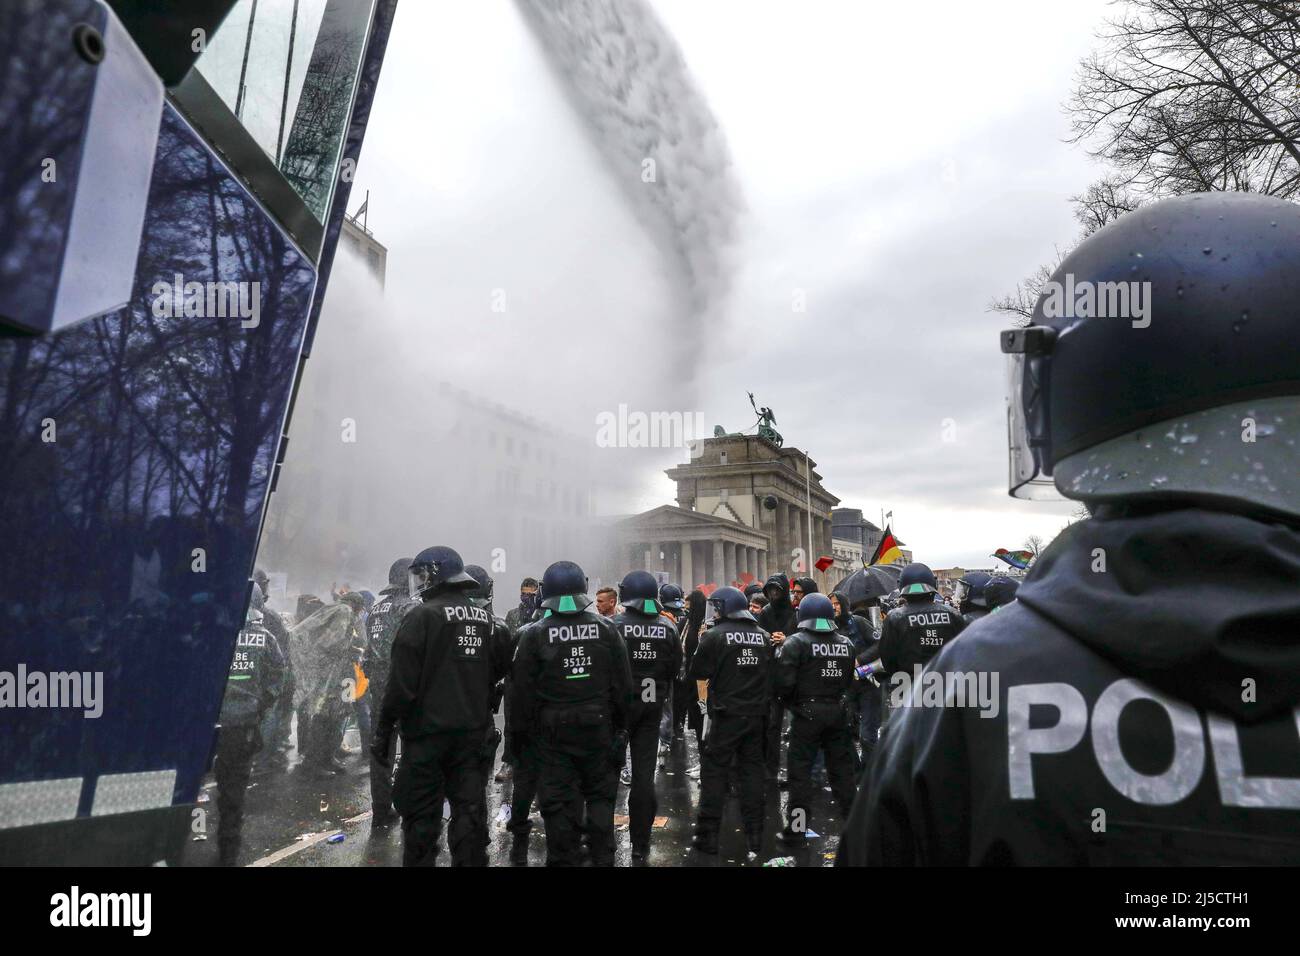 Berlin, DEU, 18.04.2020 - Water cannons in action at the Brandenburg Gate. For the second time, thousands of Corona deniers demonstrate against the restrictions in the pandemic. The police broke up the demonstration for not respecting the distance rule and not wearing mouth and nose protection. The police used water cannons. [automated translation] Stock Photo